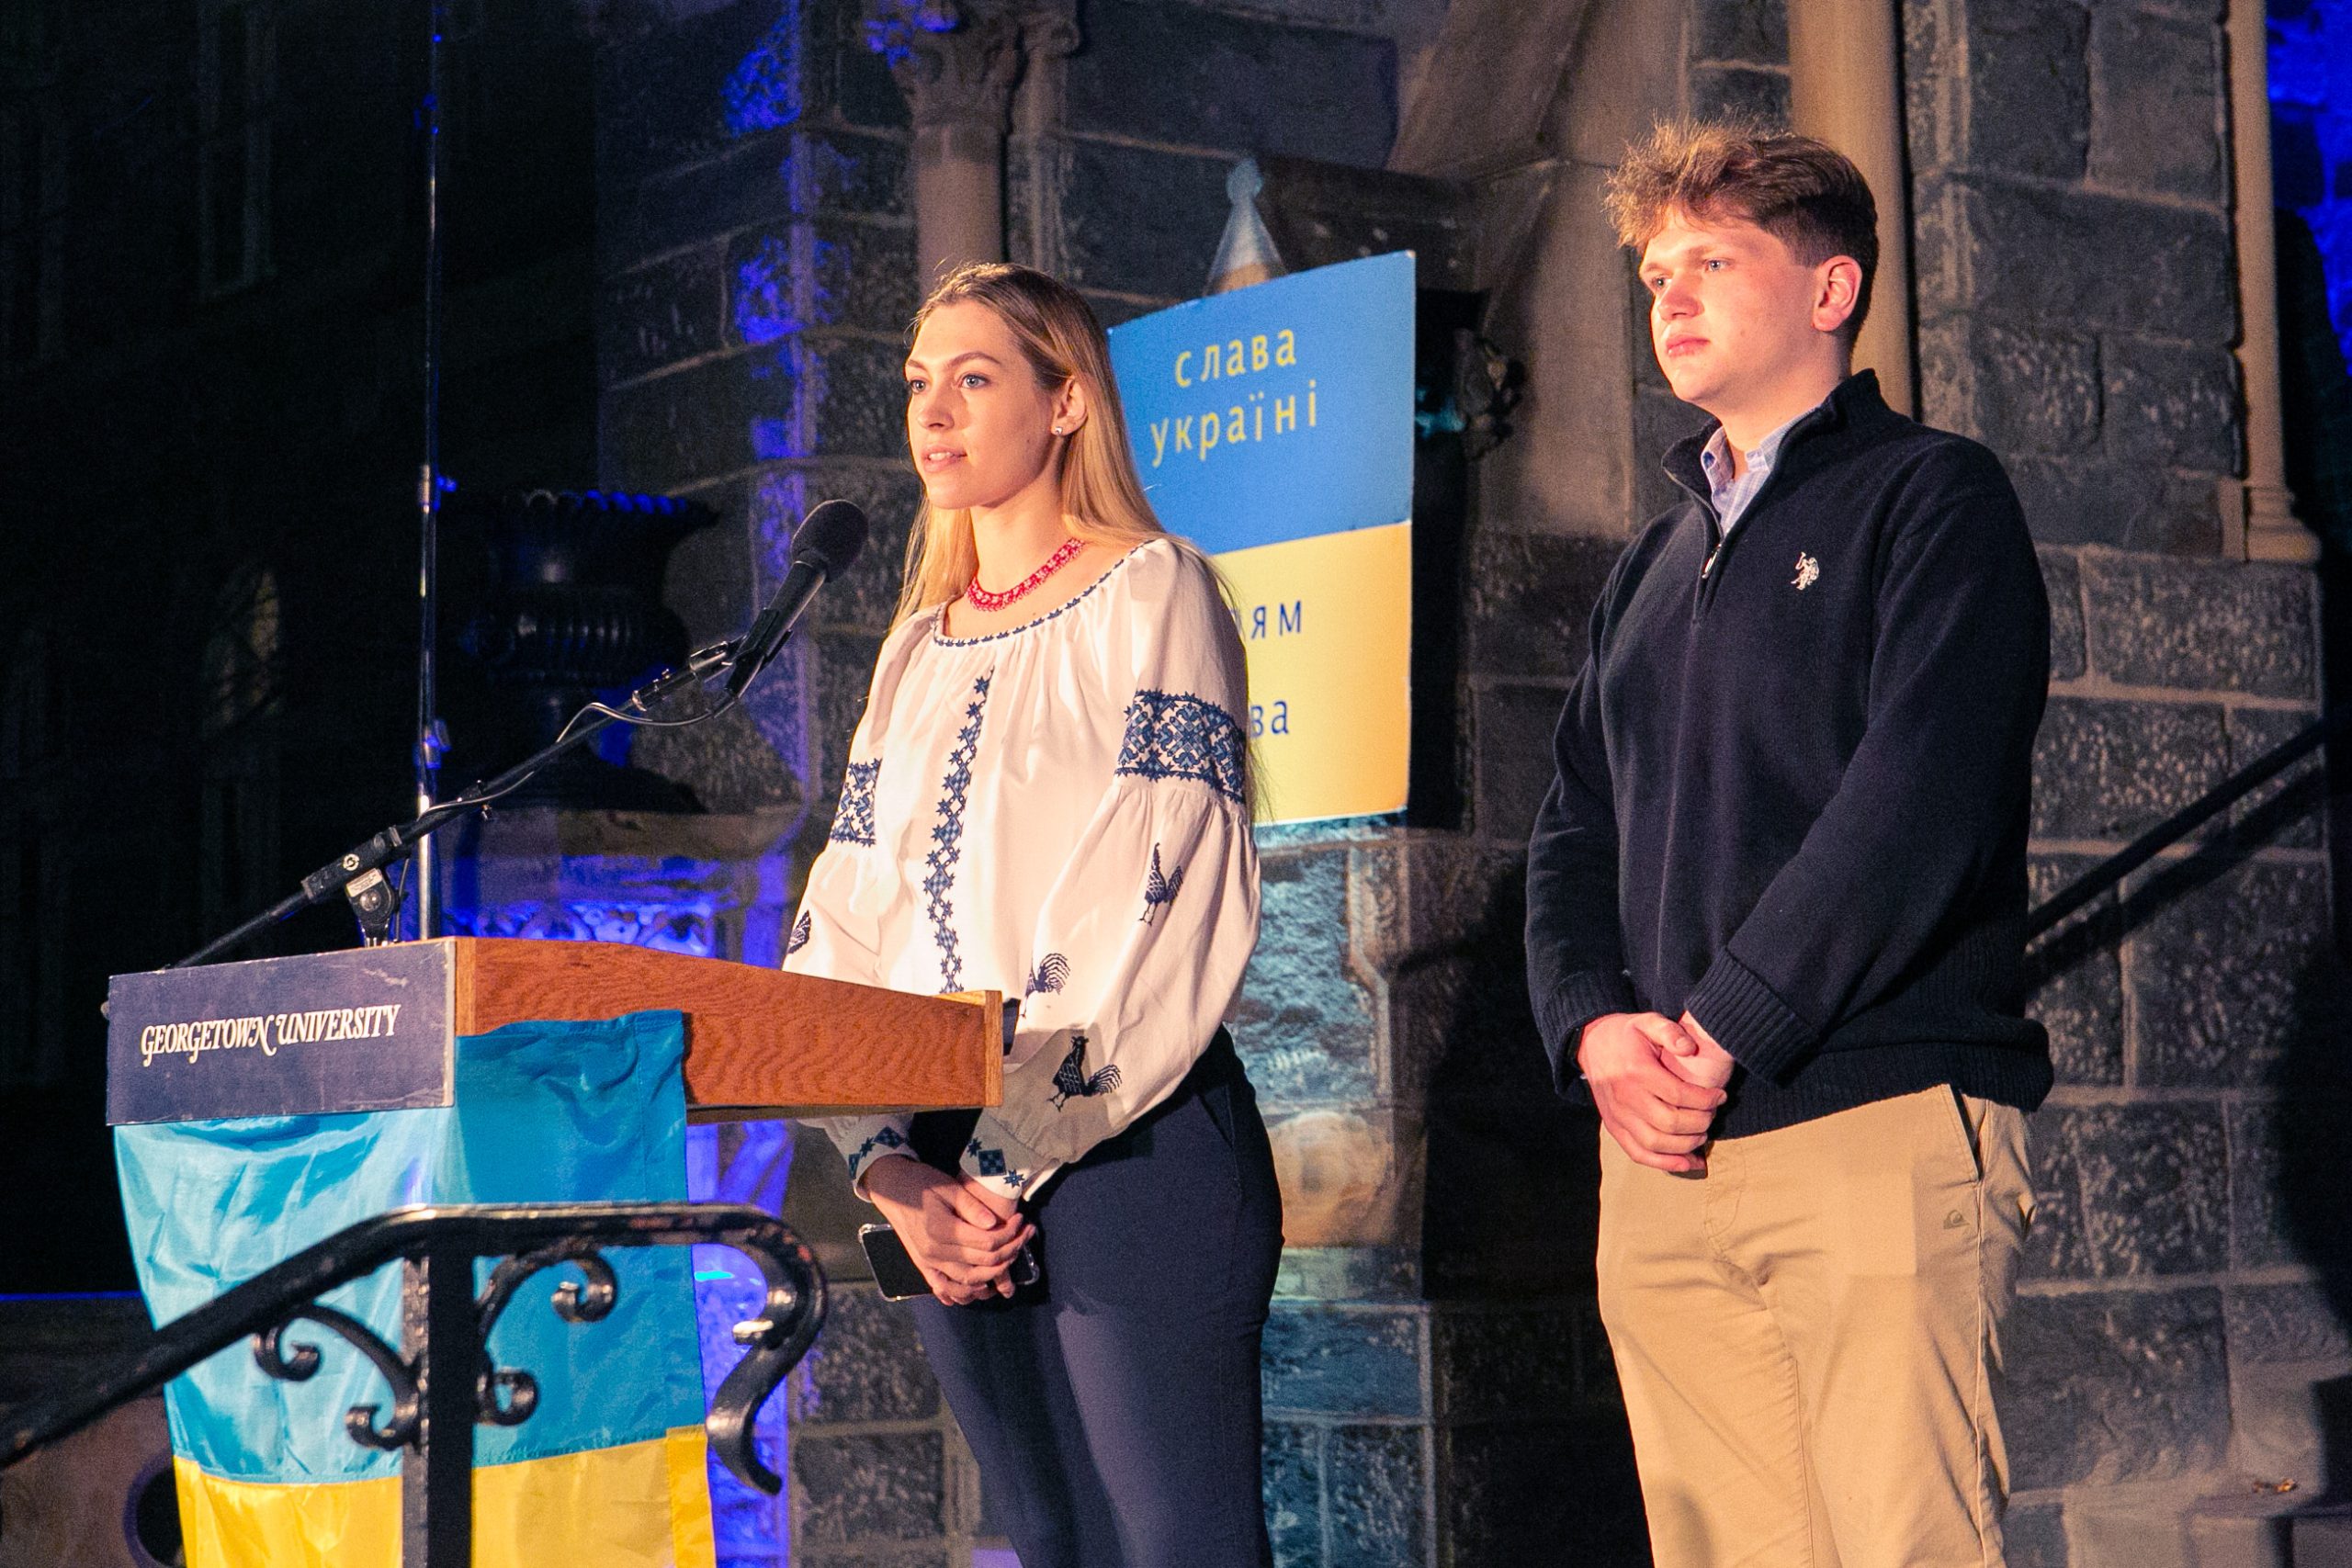 Two students speak from behind a podium with the Ukrainian flag across the front